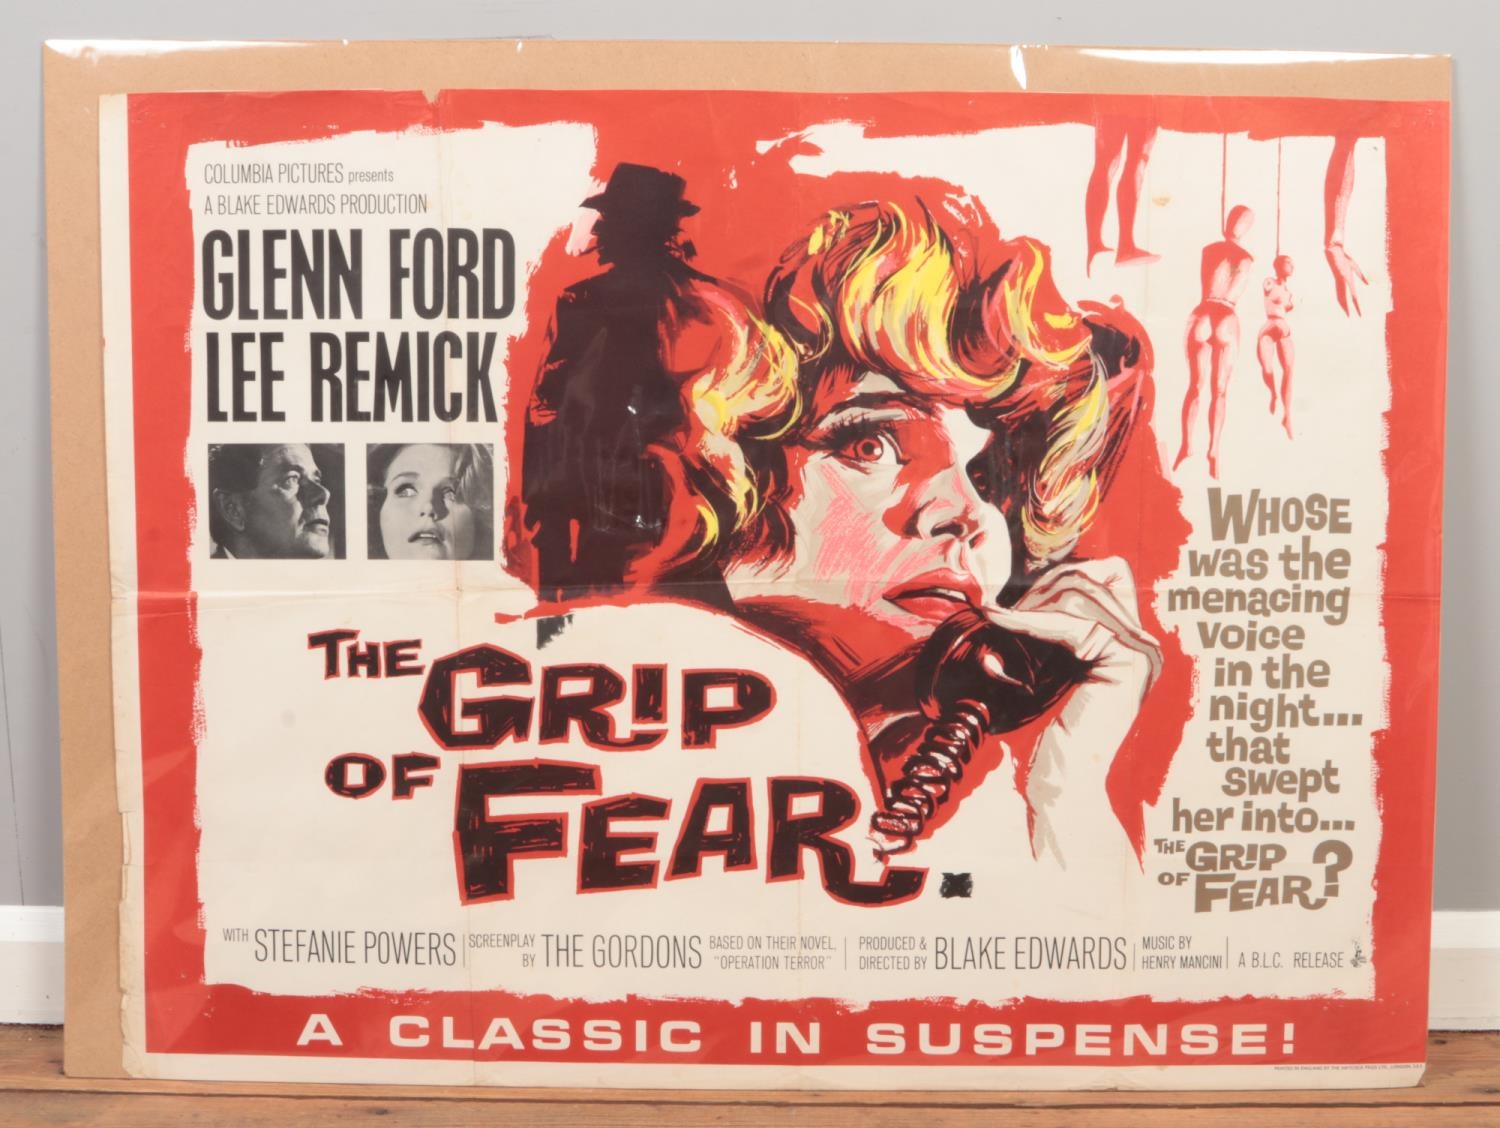 An original quad film poster for the film Grip of Fear, printed by The Haycock Press Ltd.